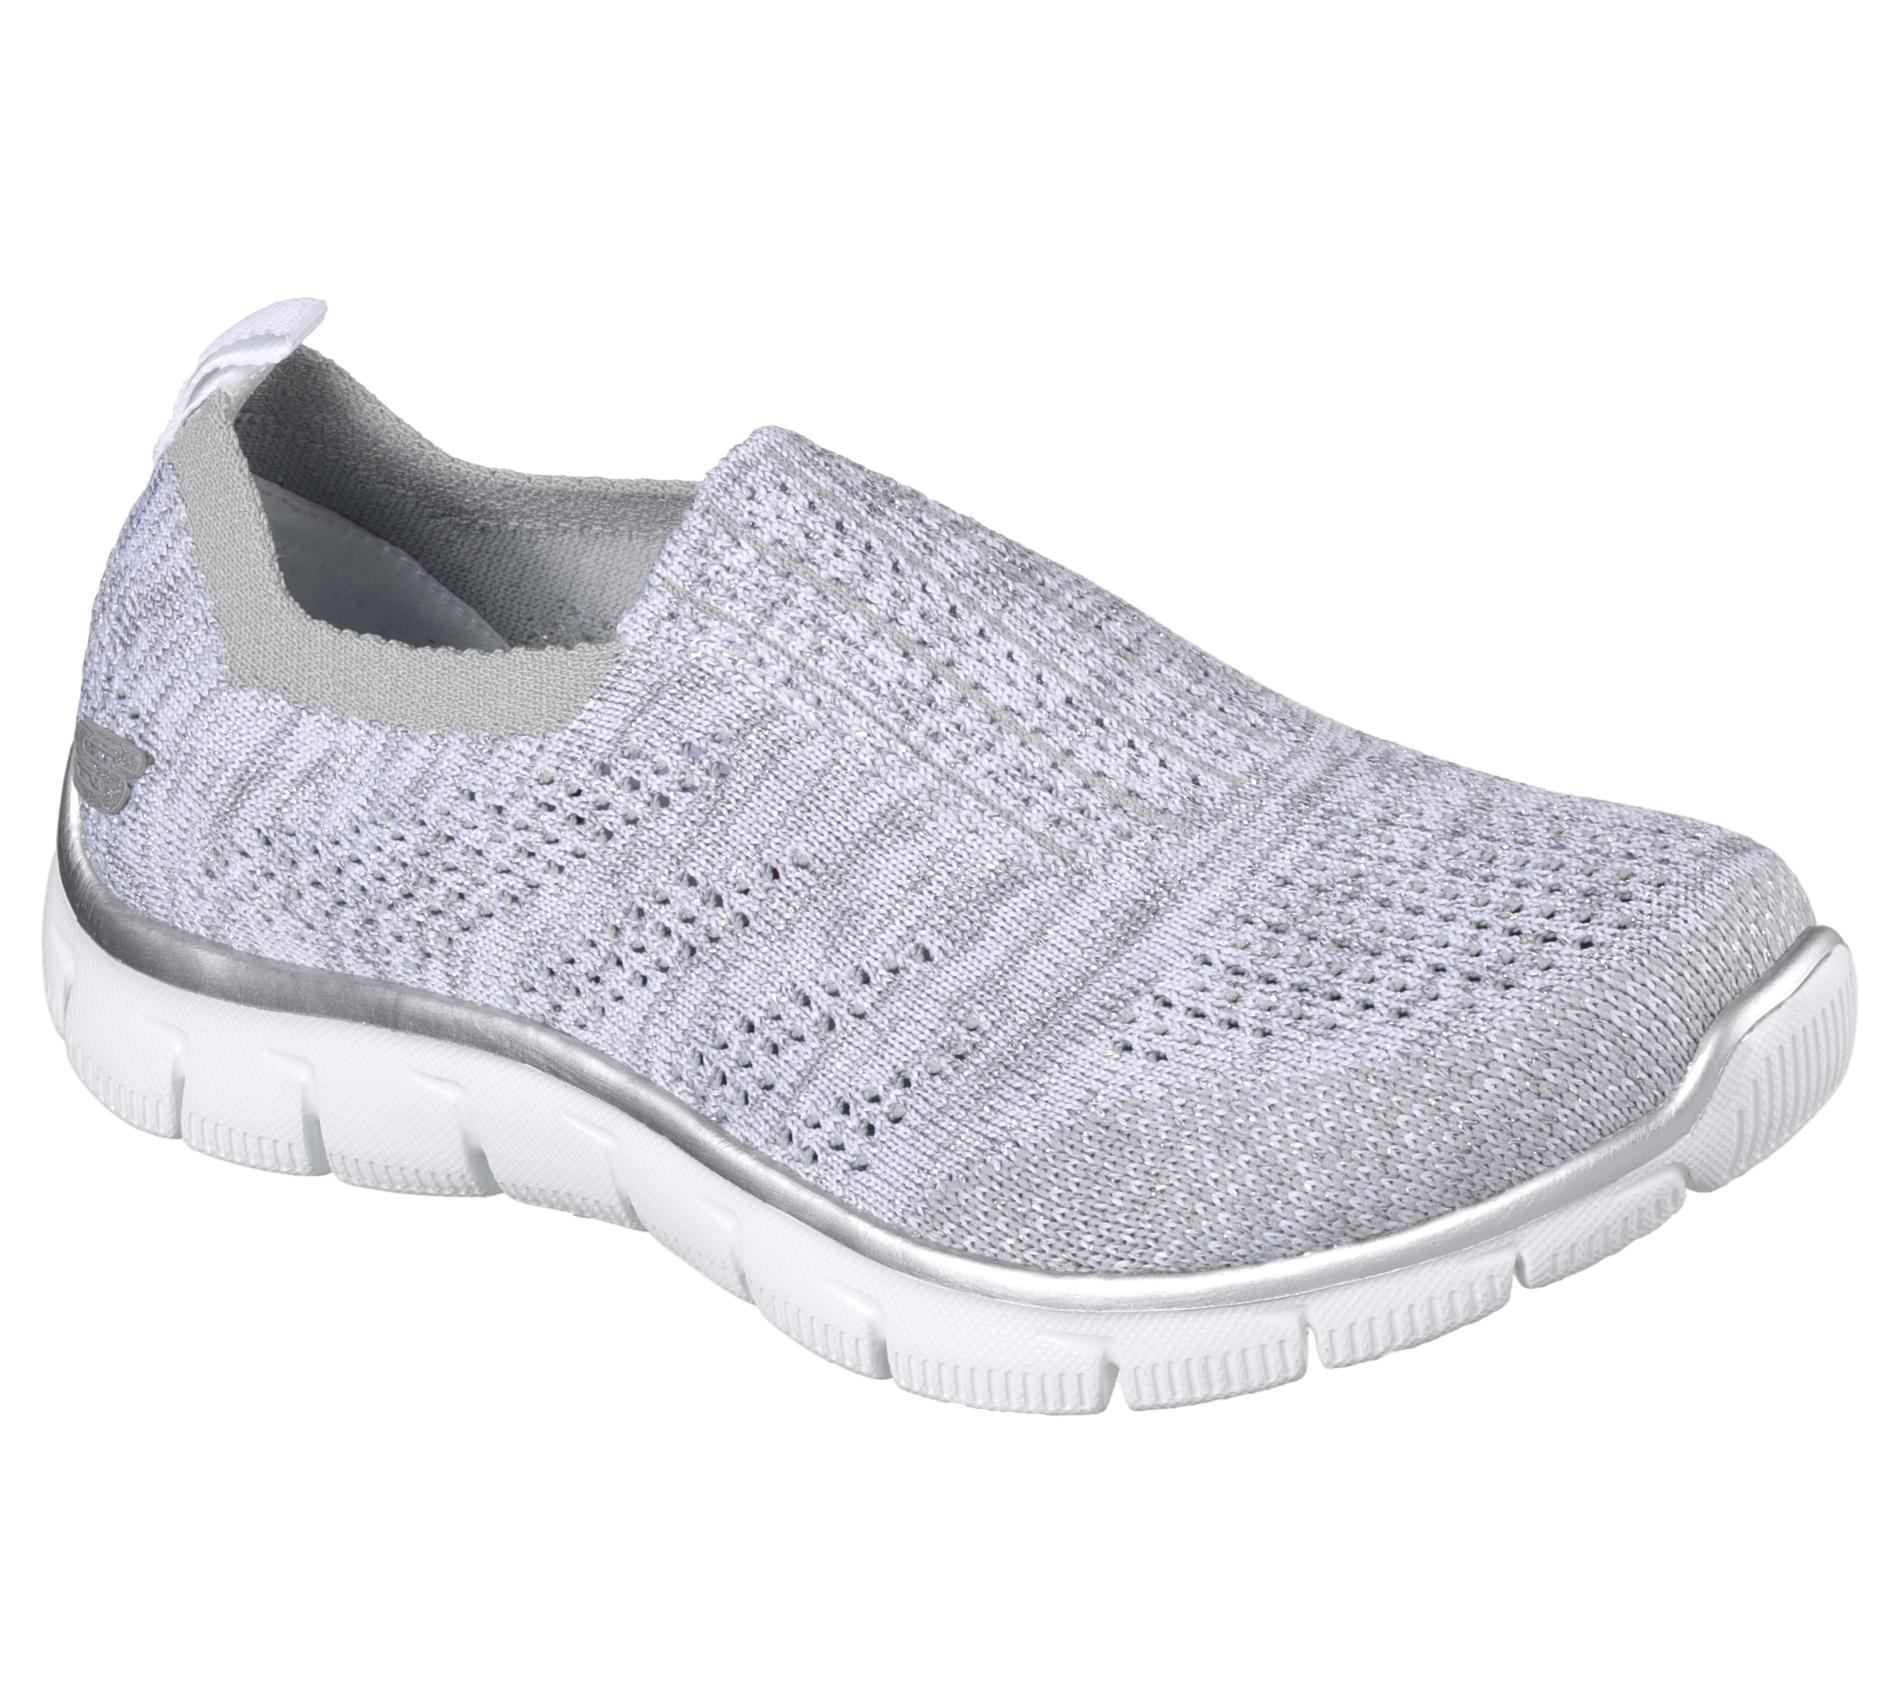 Skechers Women's Empire Round Up Athletic Grey Shoe - Shoes - Women's ...